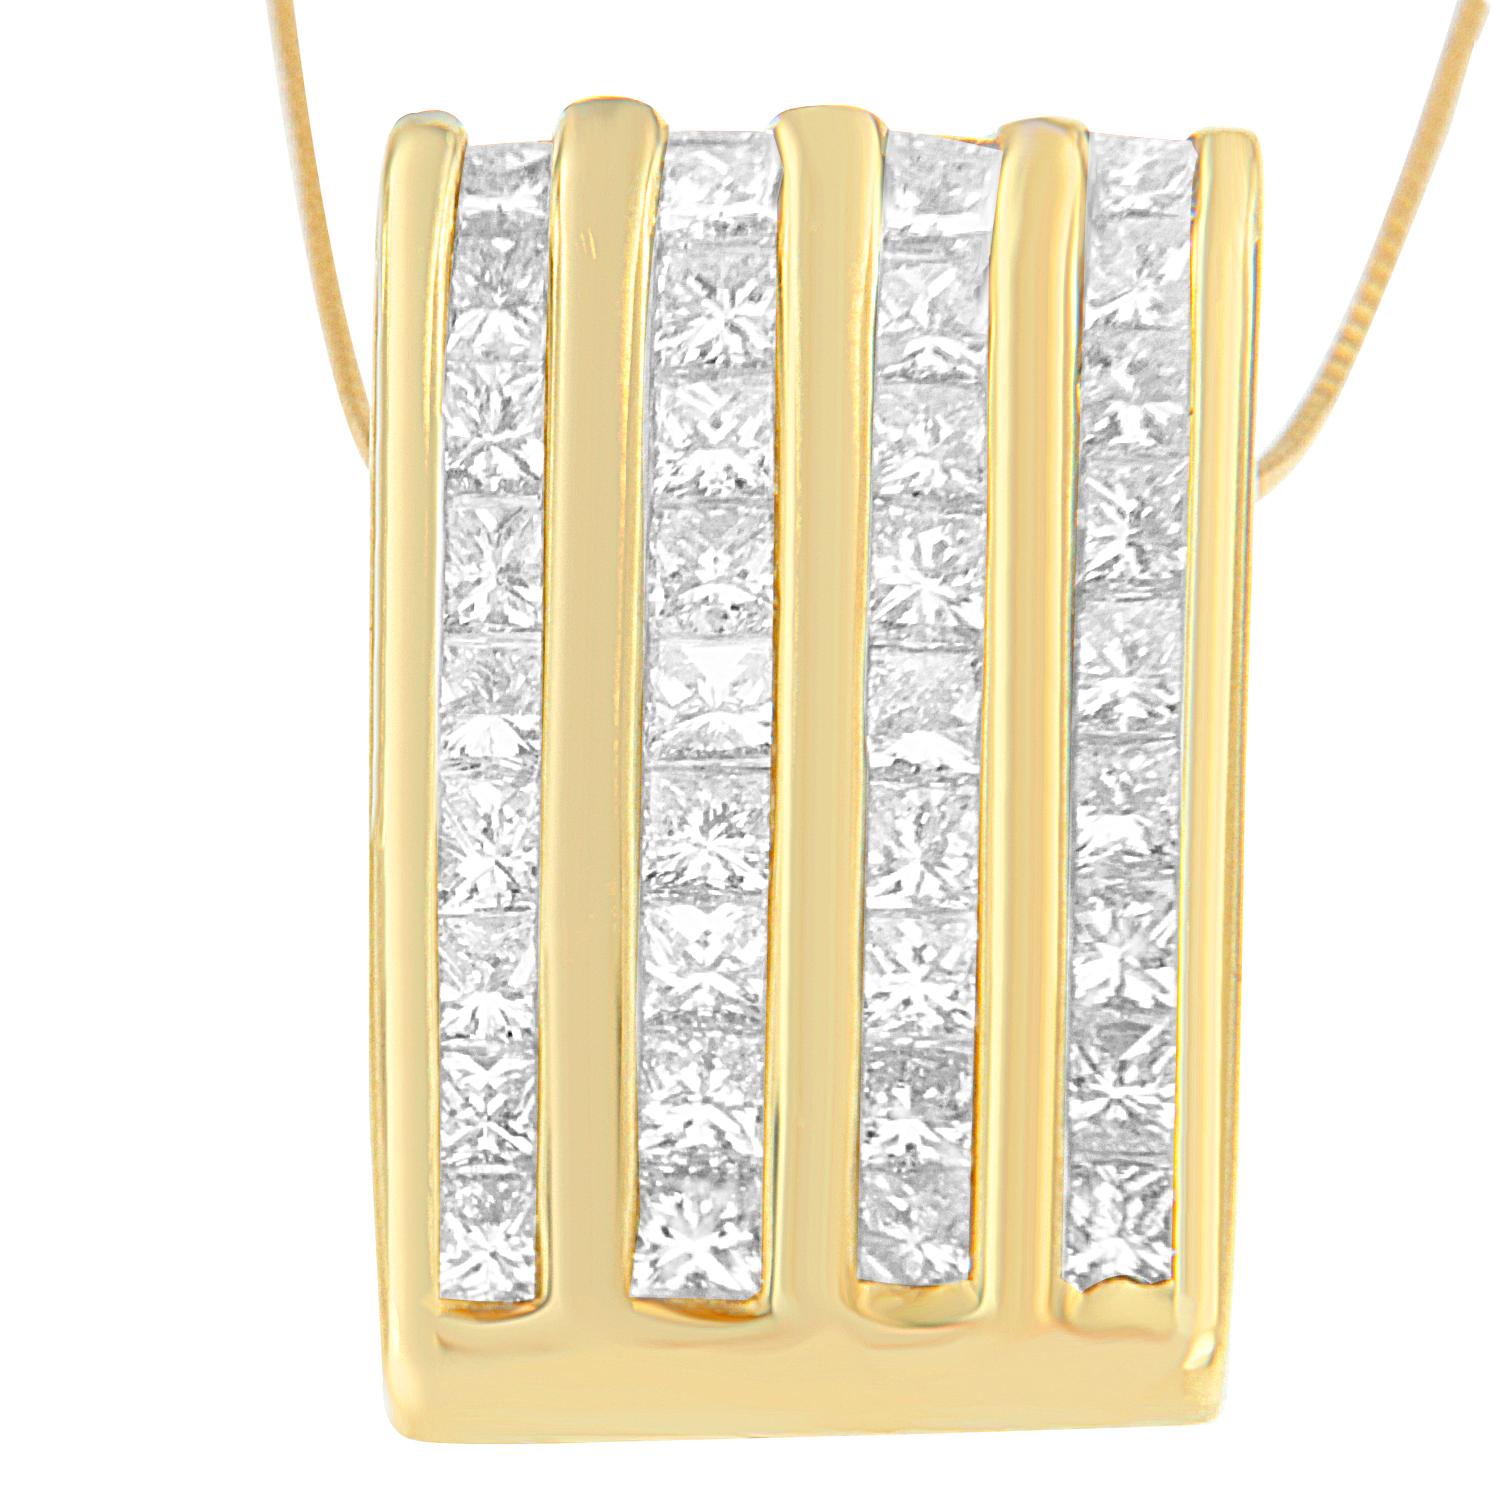 This radiant block pendant is adorned with over two carats of princess cut diamonds for truly brilliant style. Set off by 14 karat yellow gold bands in between, it's a piece that always gets noticed. This beautiful necklace includes 18” box chain